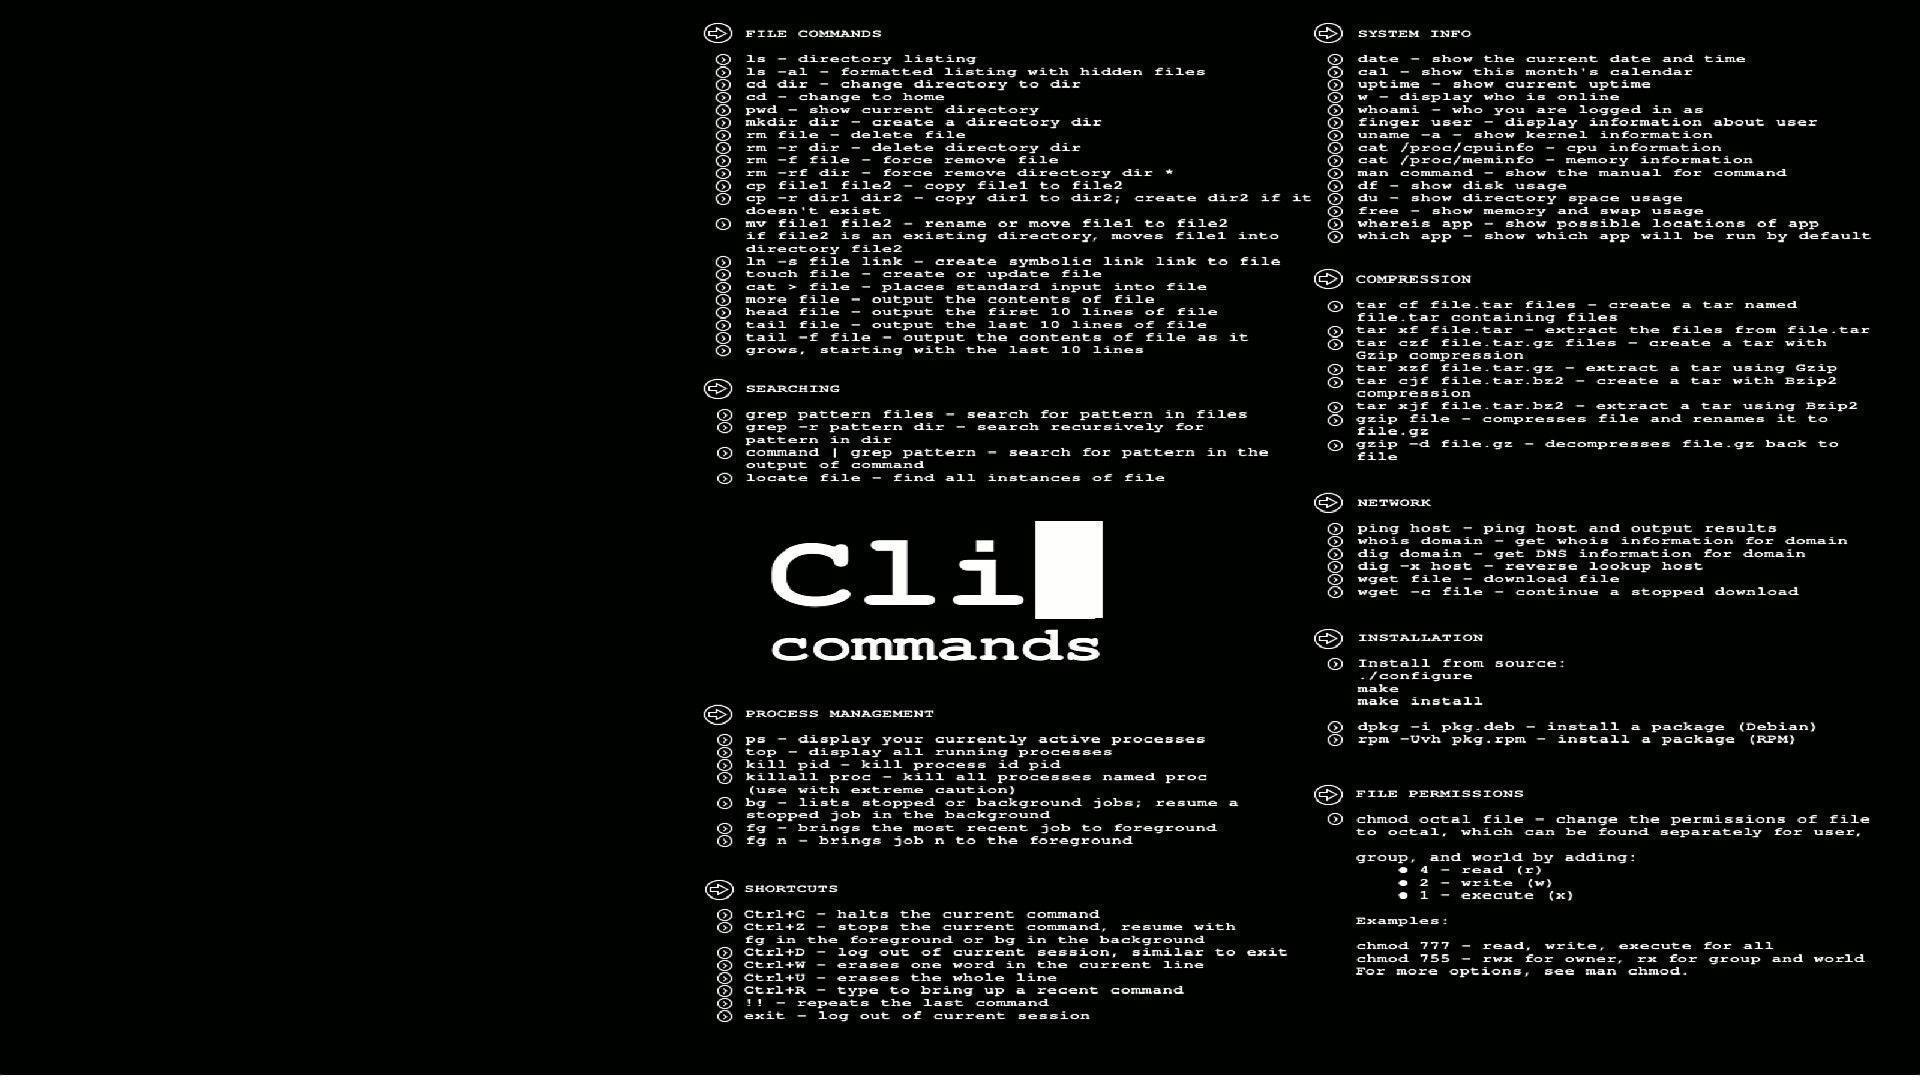 Cool Linux Command Wallpaper. I Have A PC